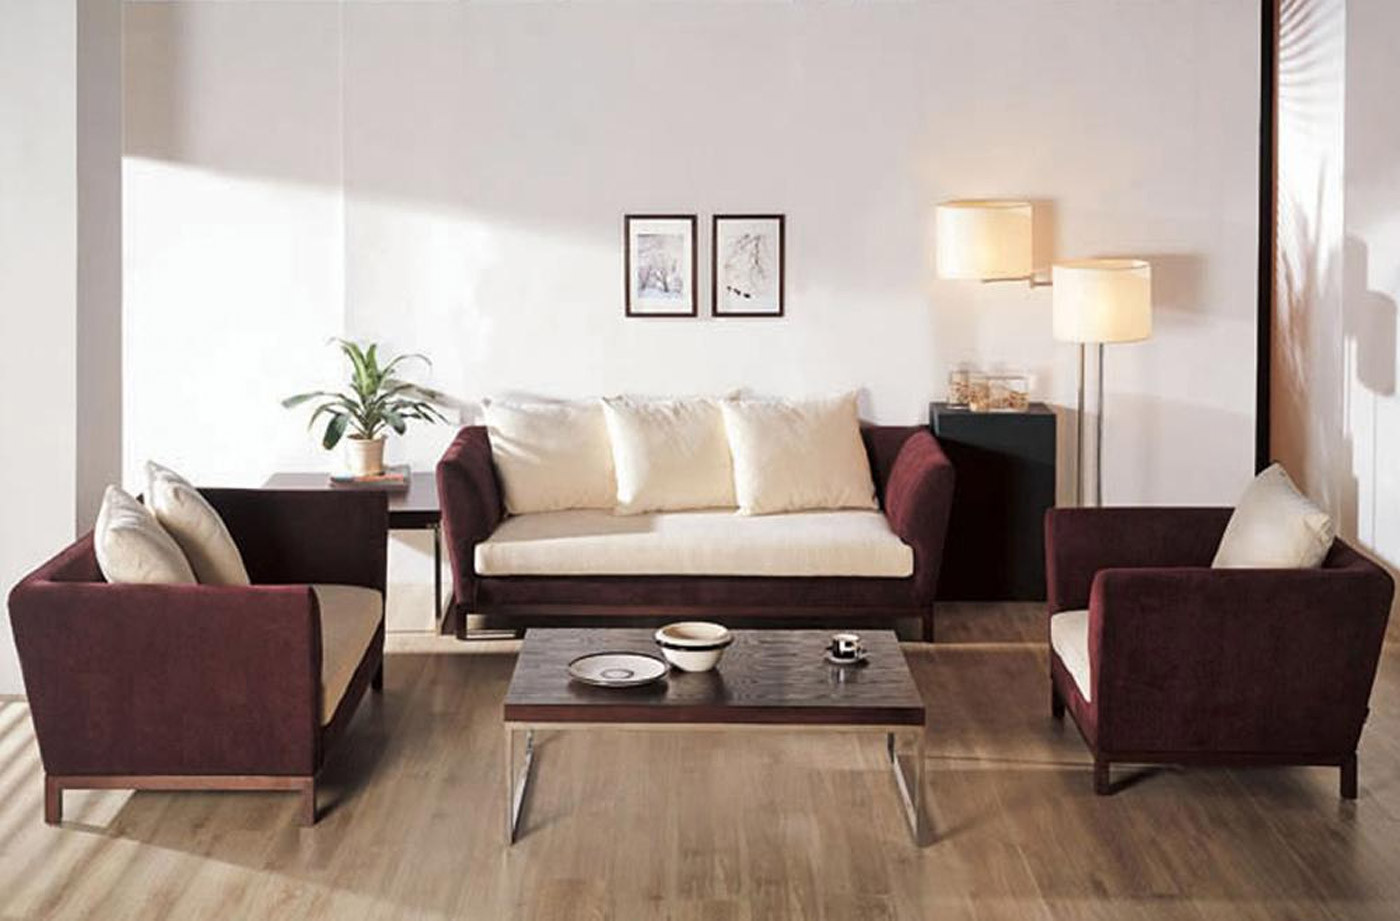 Contemporary Living Room Chairs
 Find Suitable Living Room Furniture With Your Style